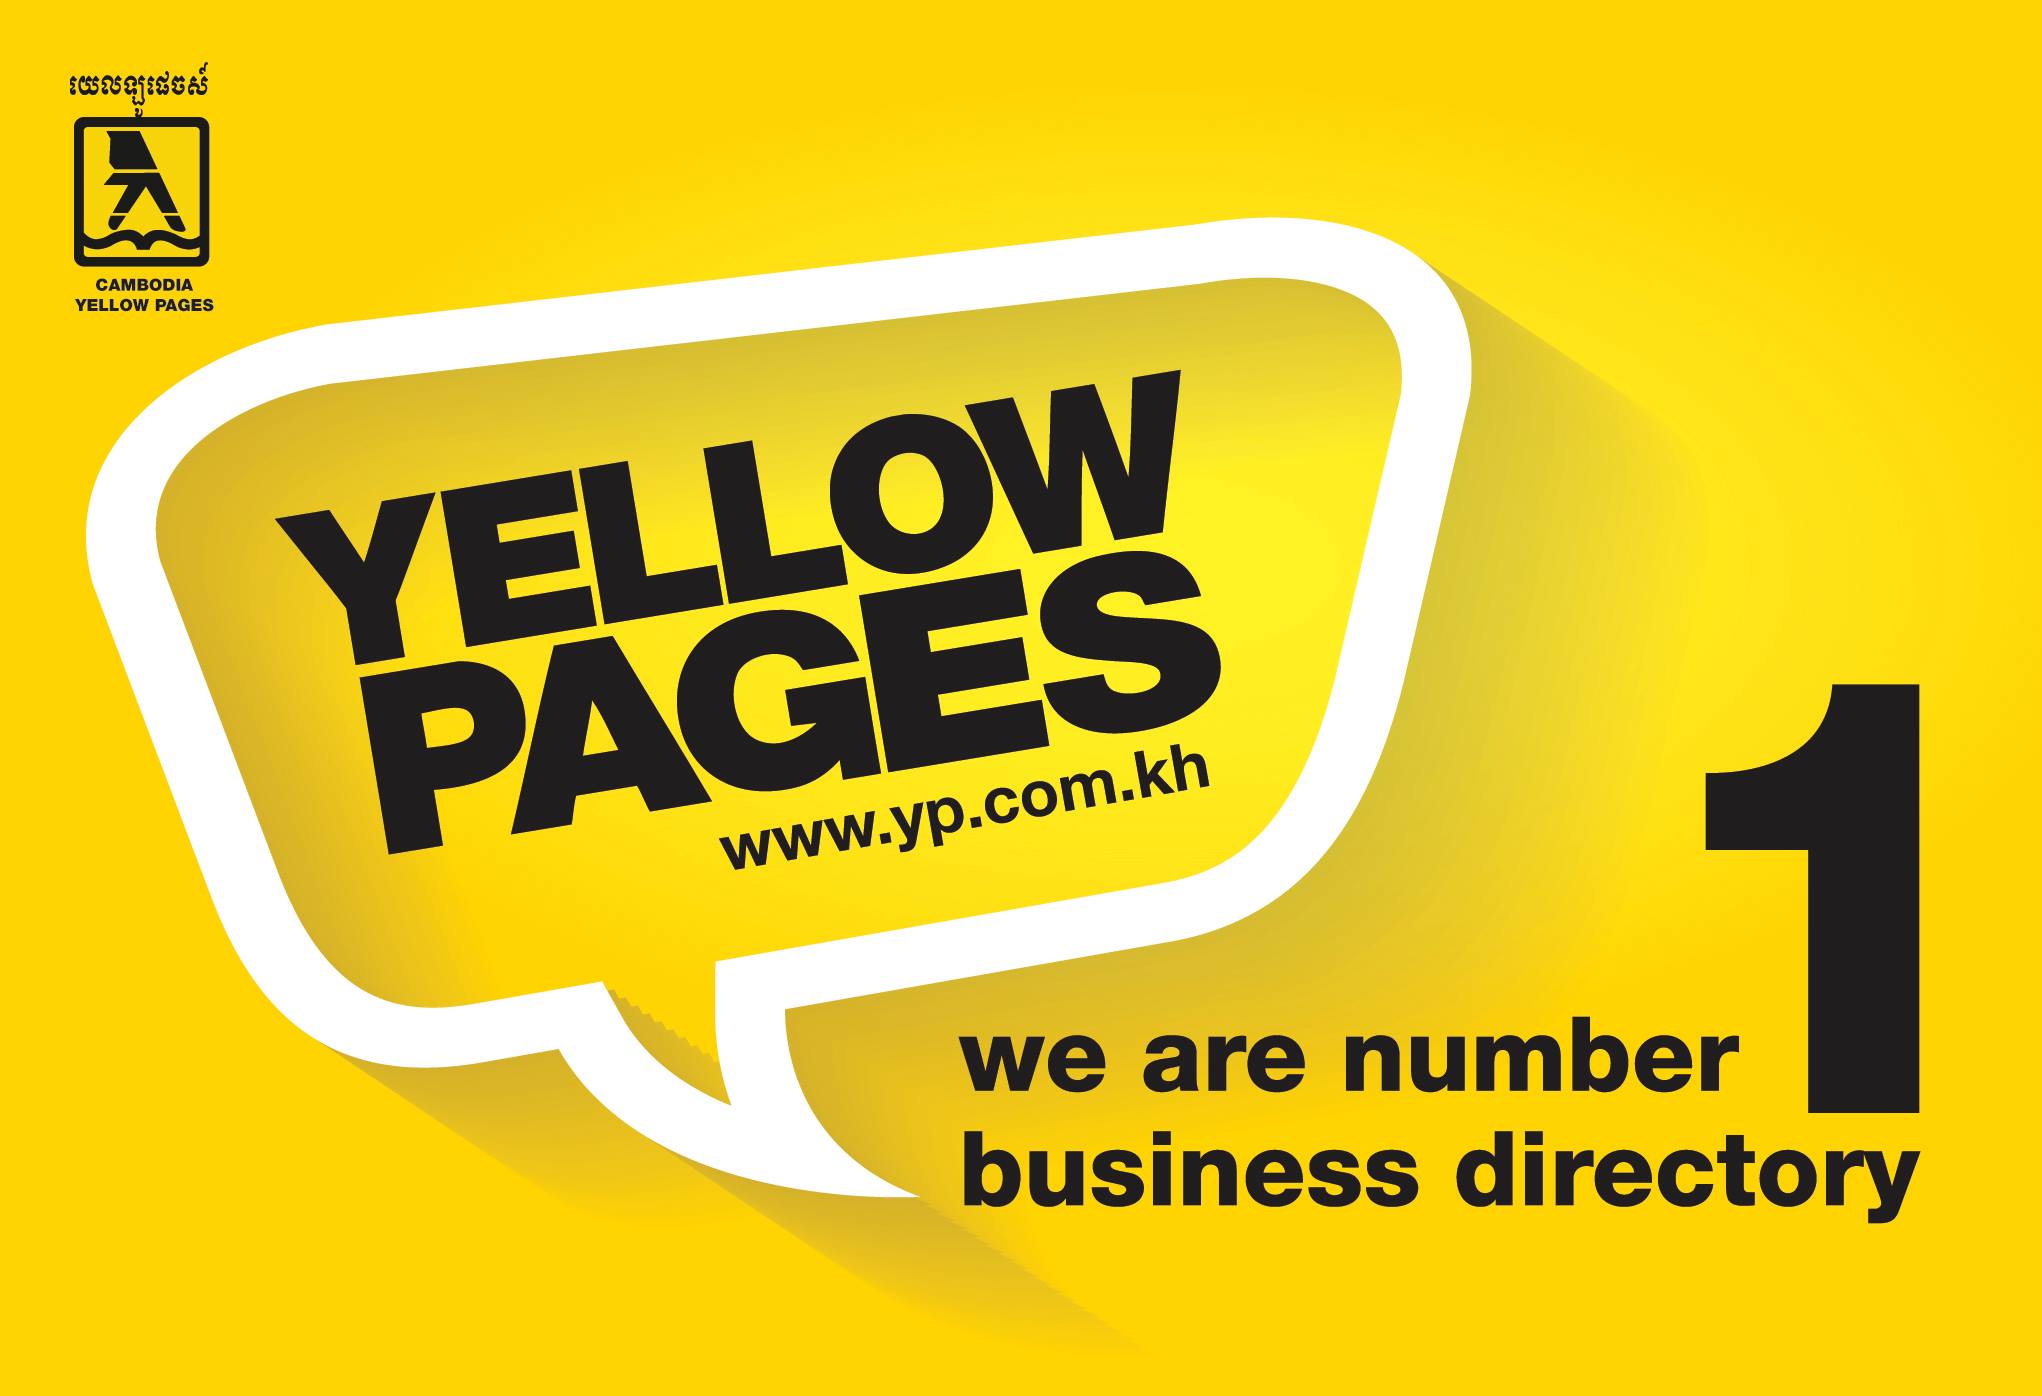 YP.com Logo - Cambodia Yellow Pages